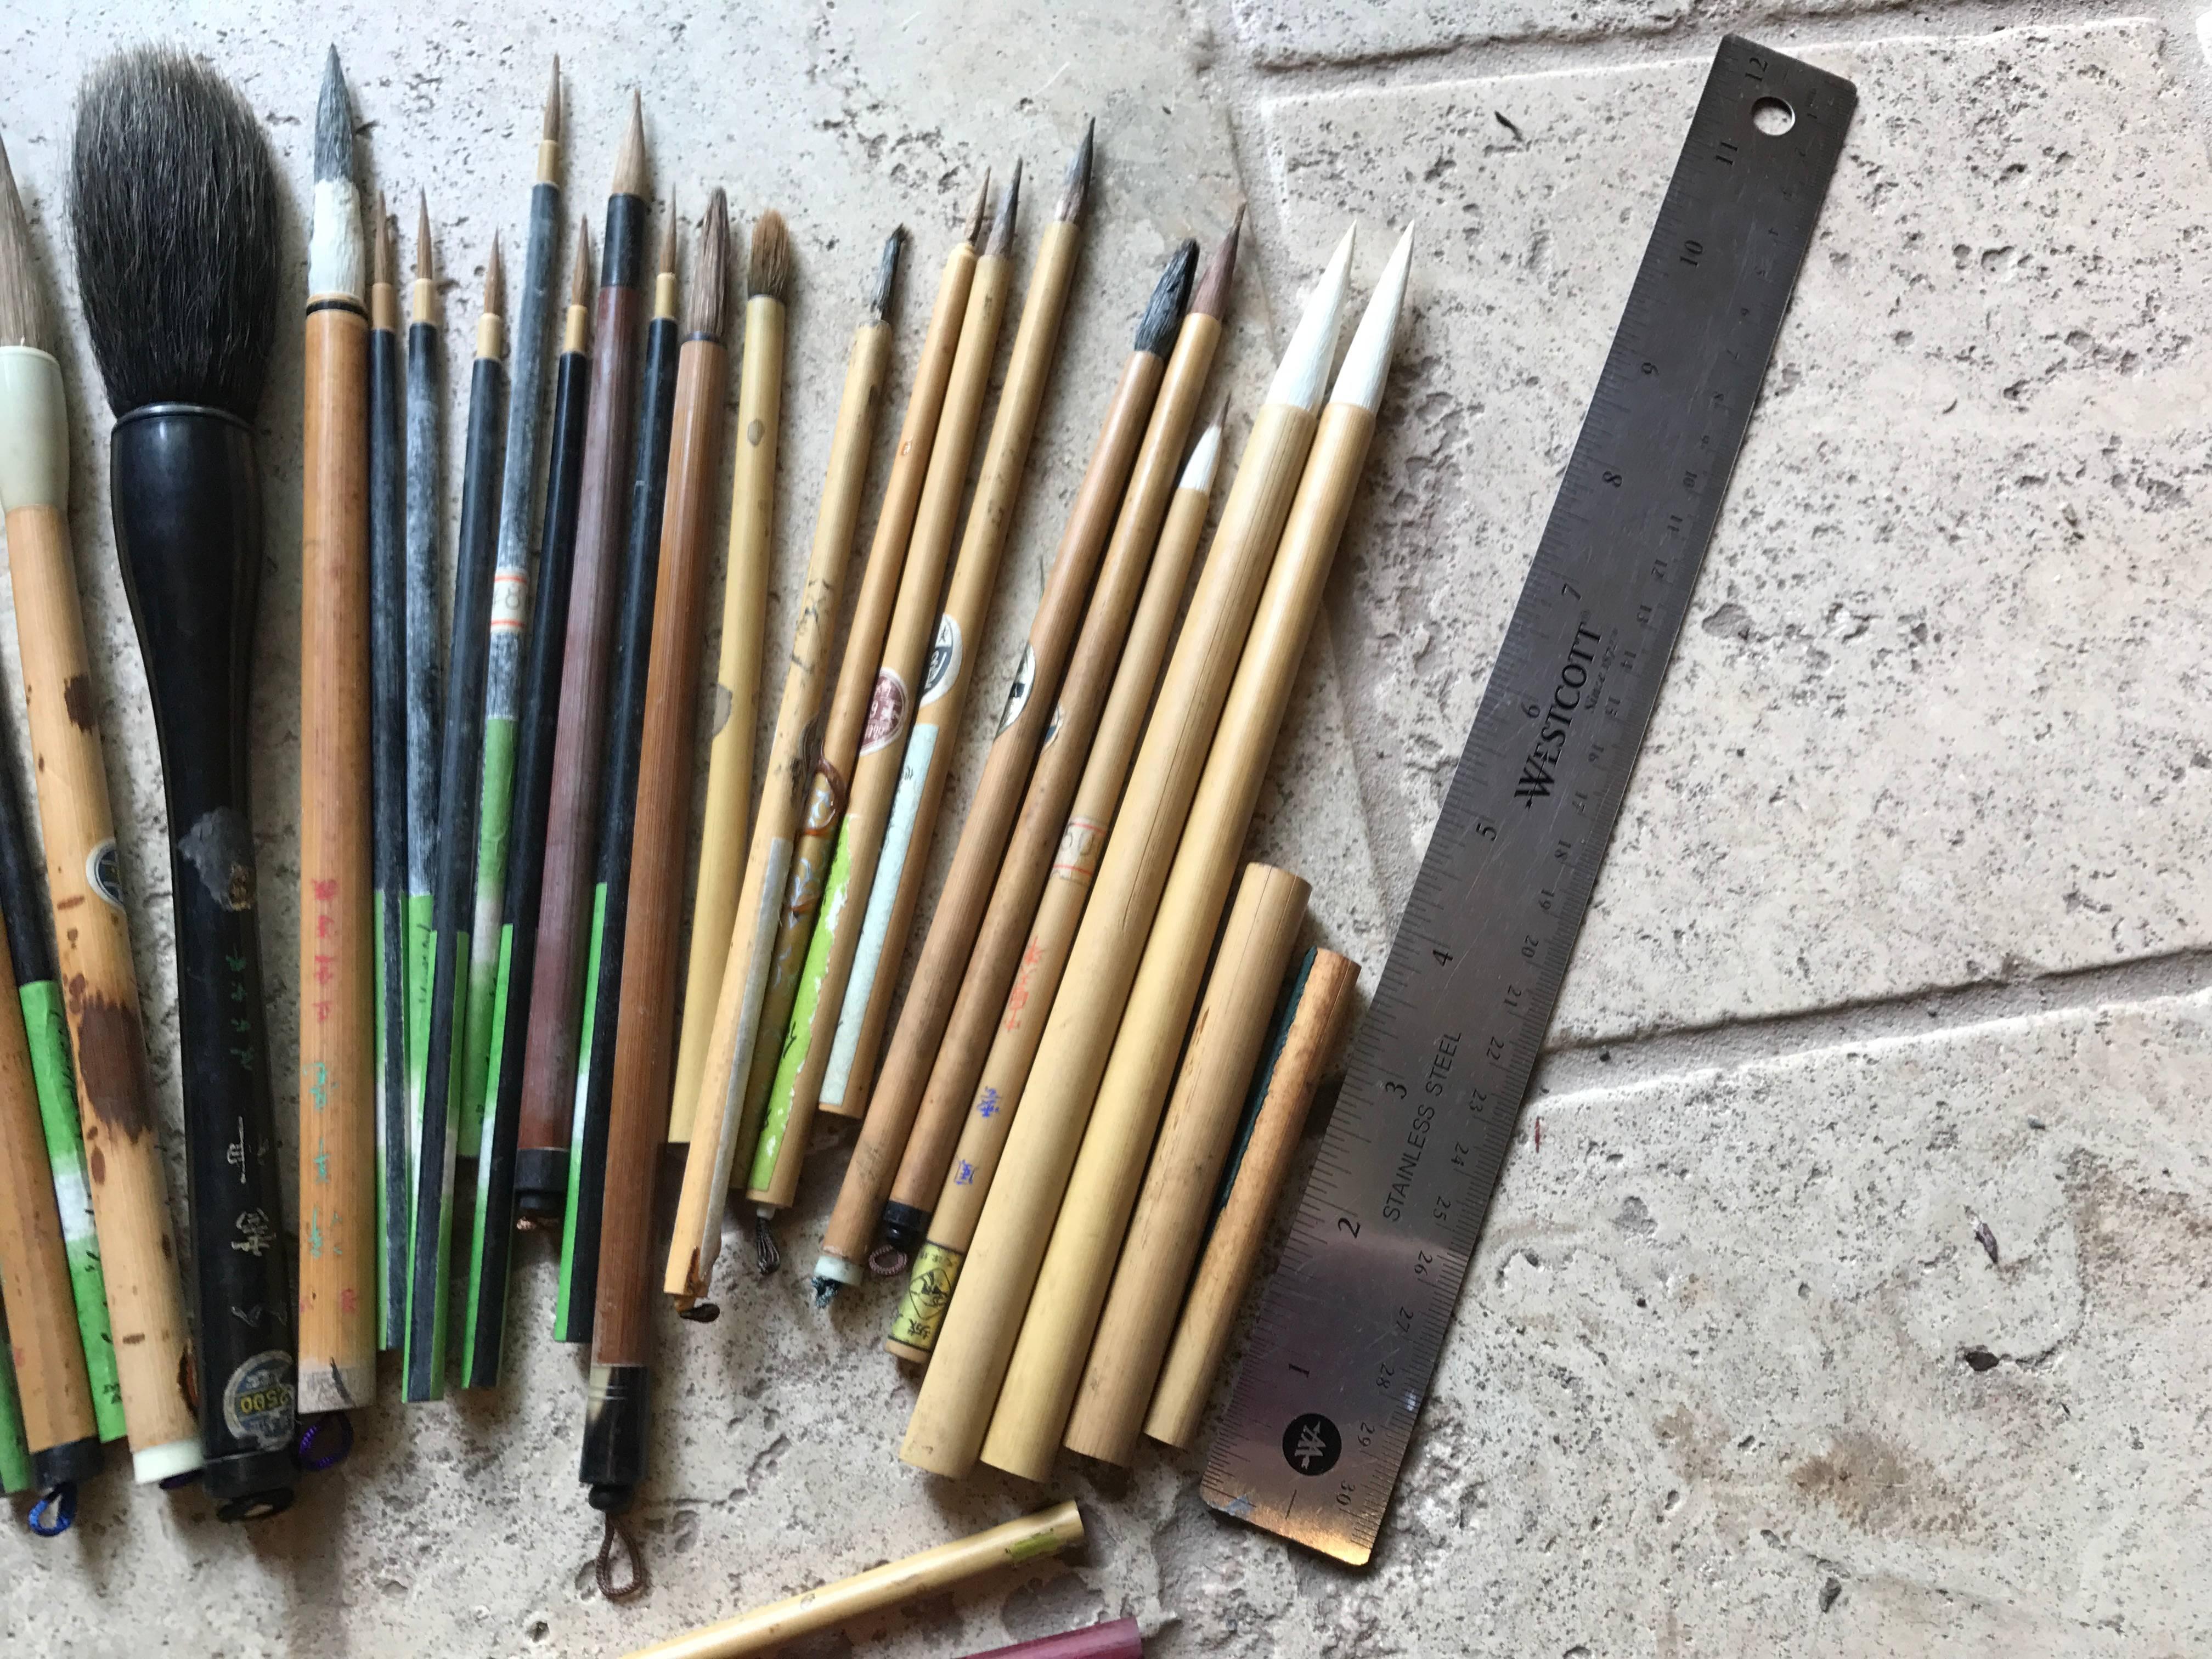 20th Century Found! Antique Artisan's Cache of 43 Old Paint and Calligraphy Bamboo Brushes